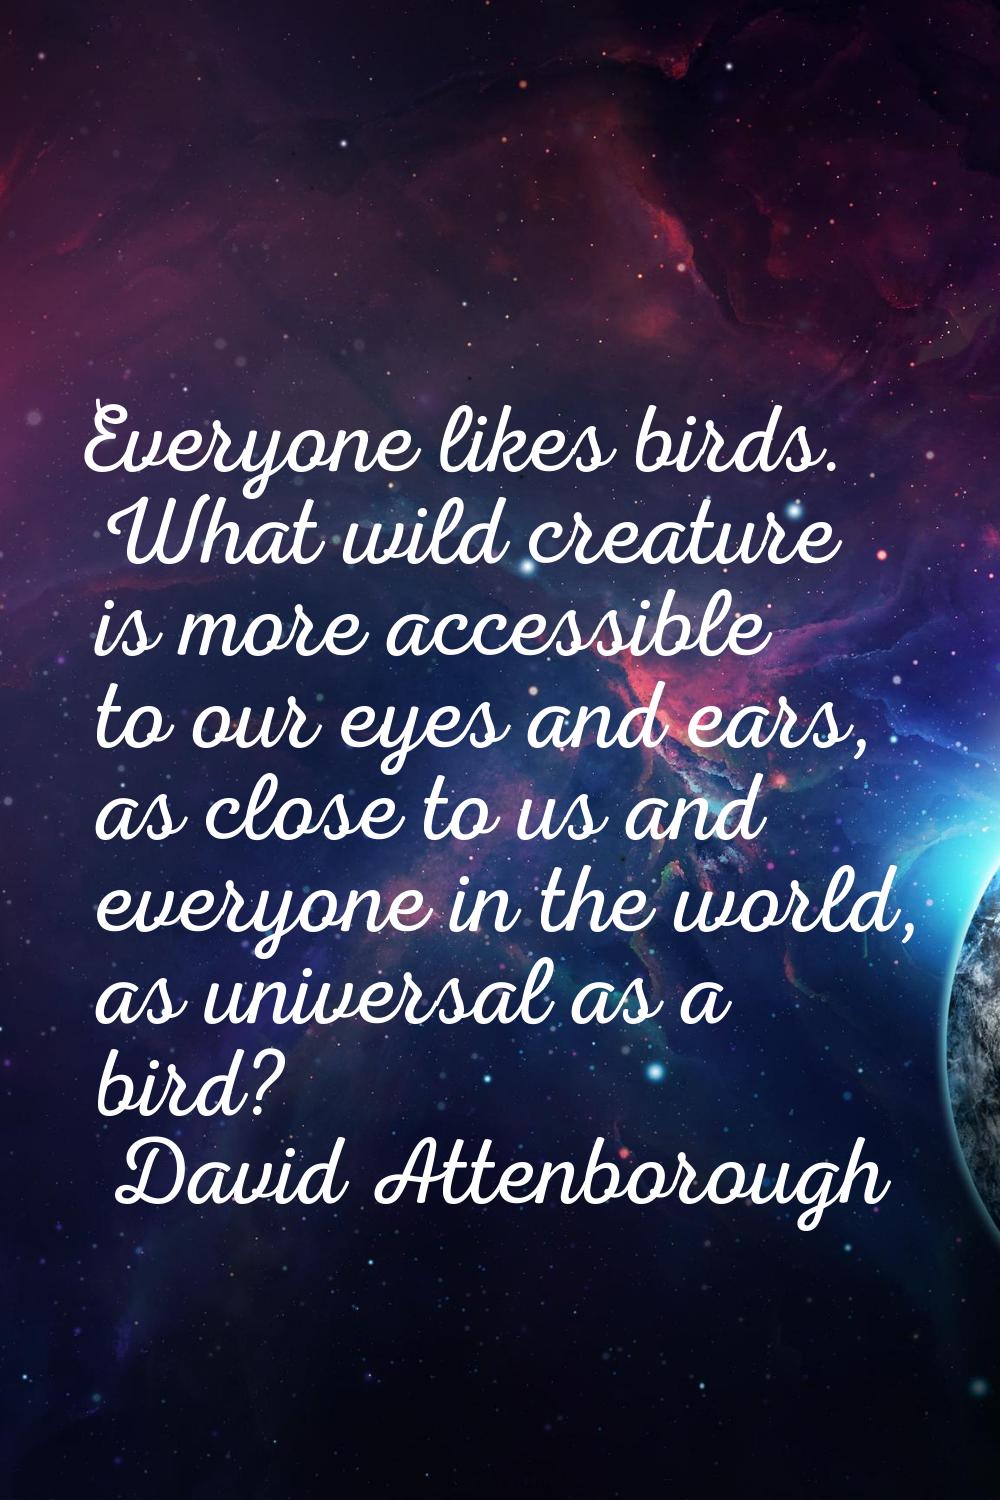 Everyone likes birds. What wild creature is more accessible to our eyes and ears, as close to us an